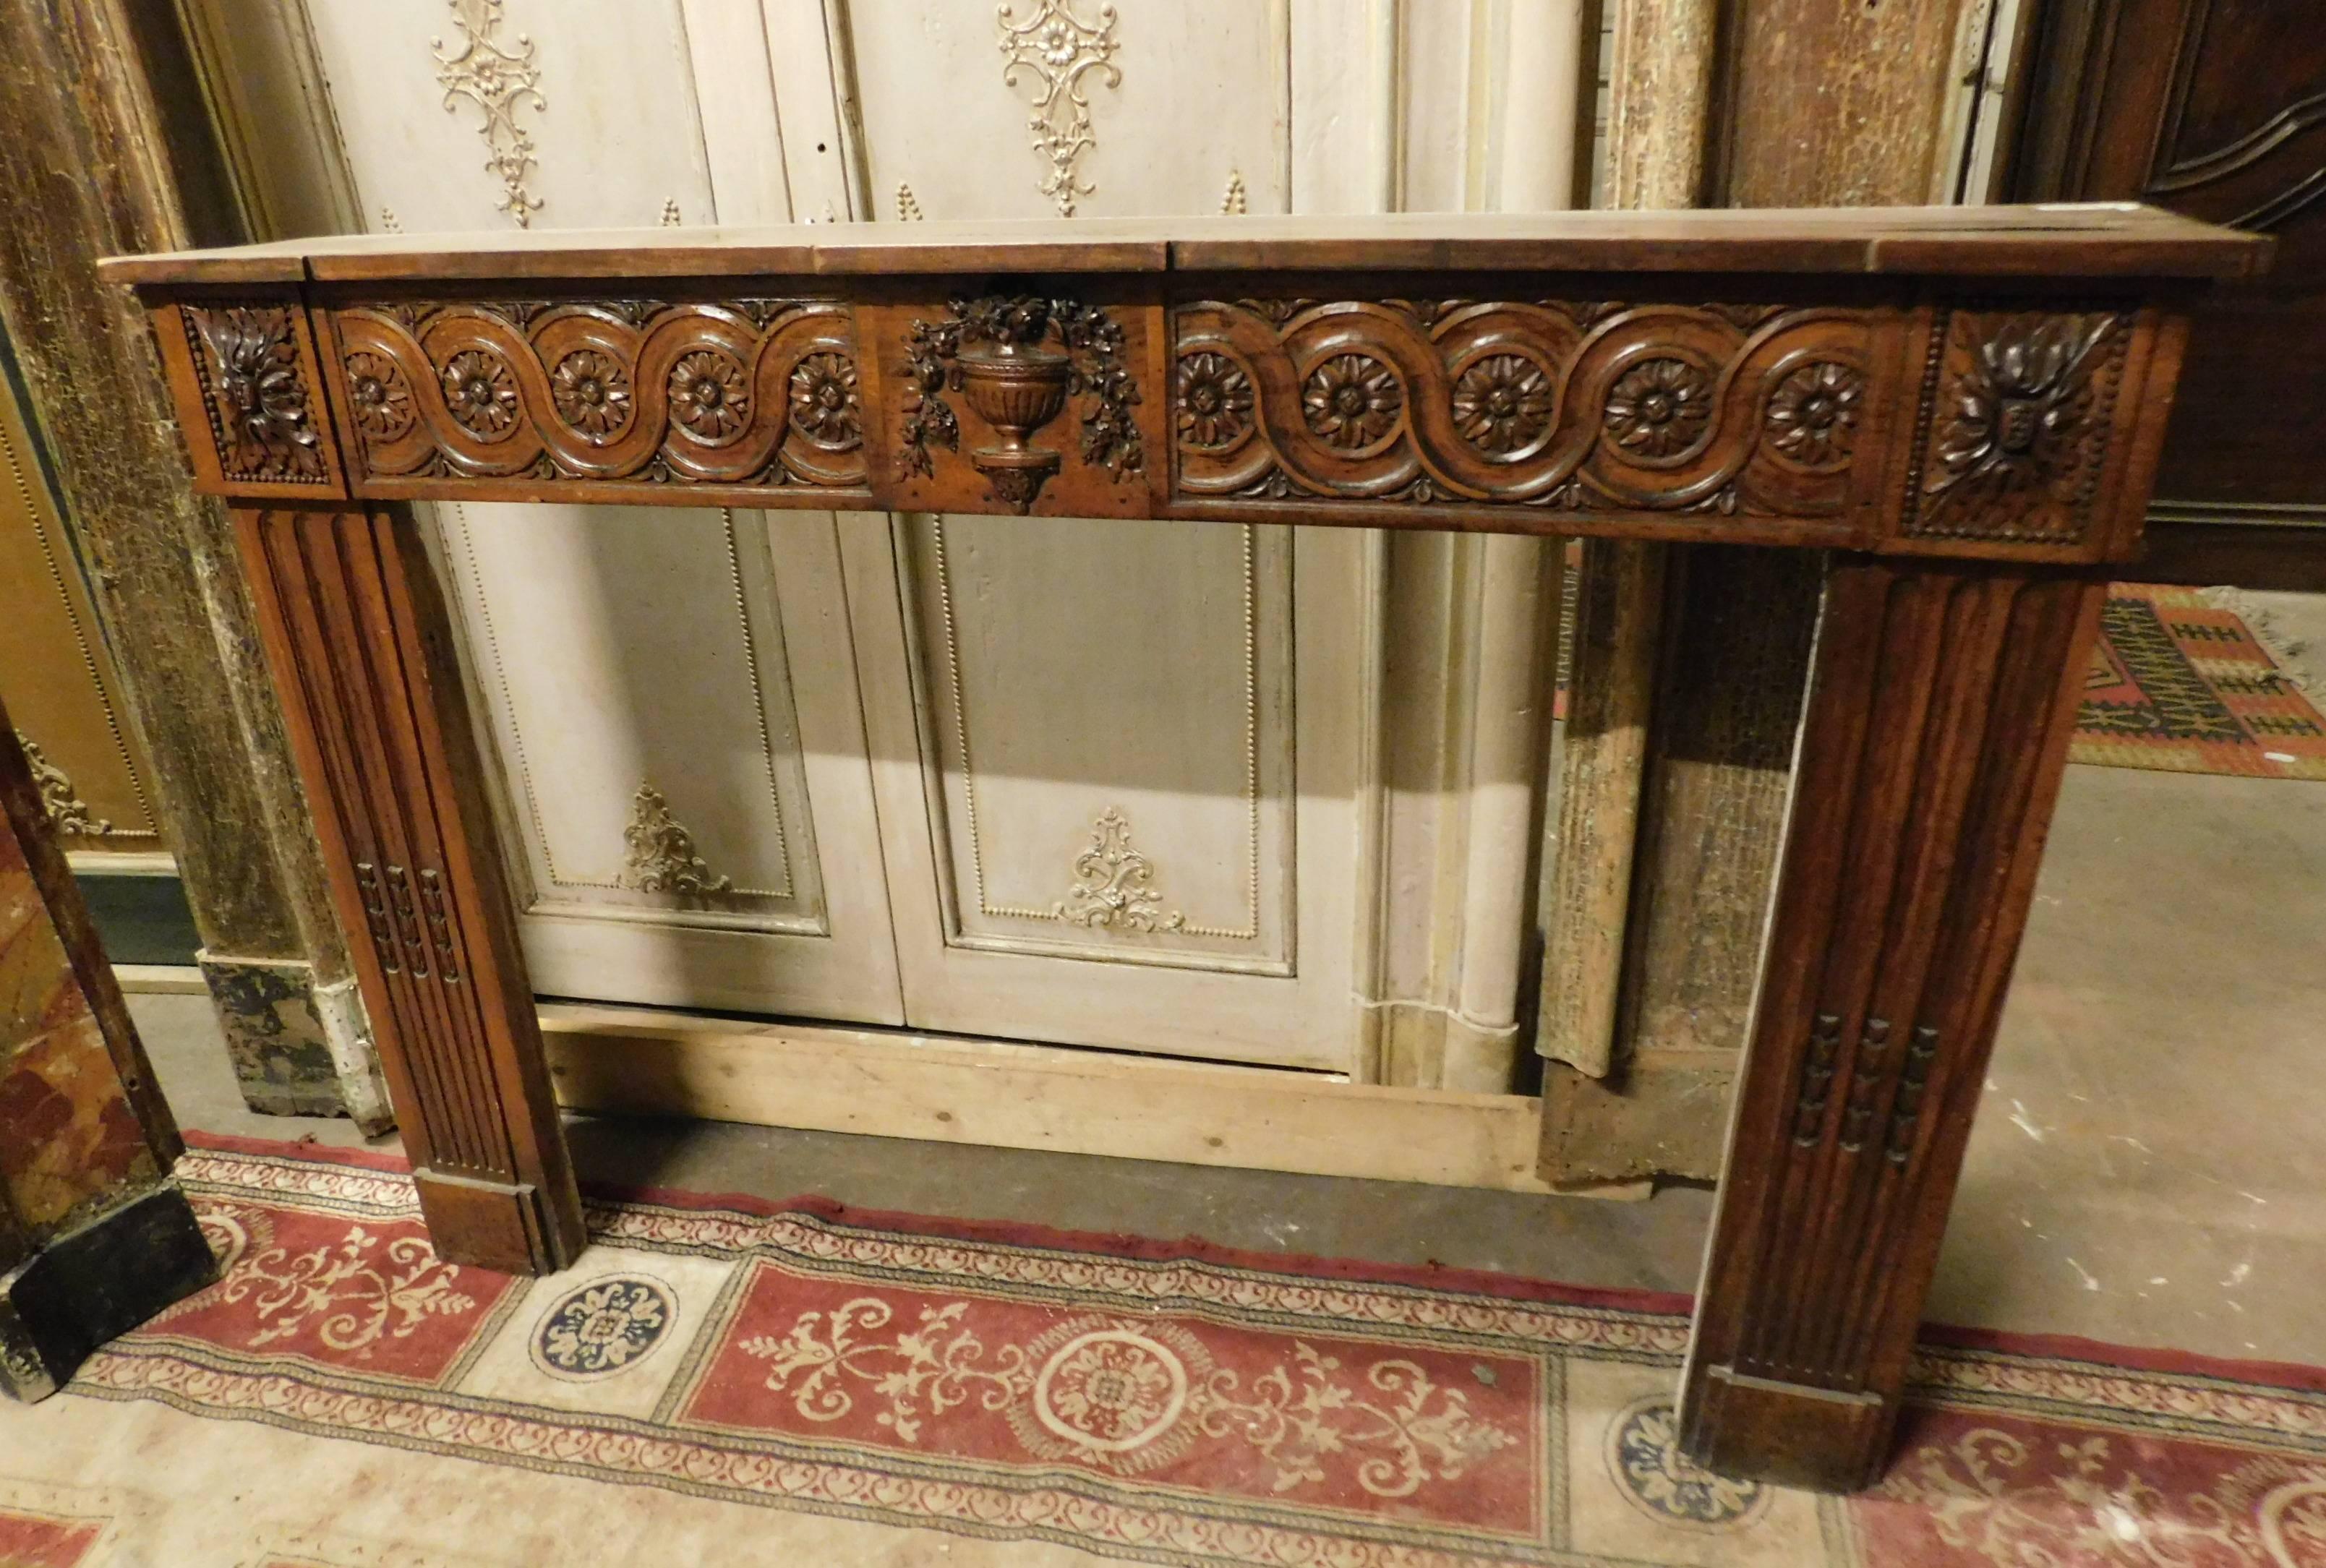 18th century richly carved wood fireplace mantel.